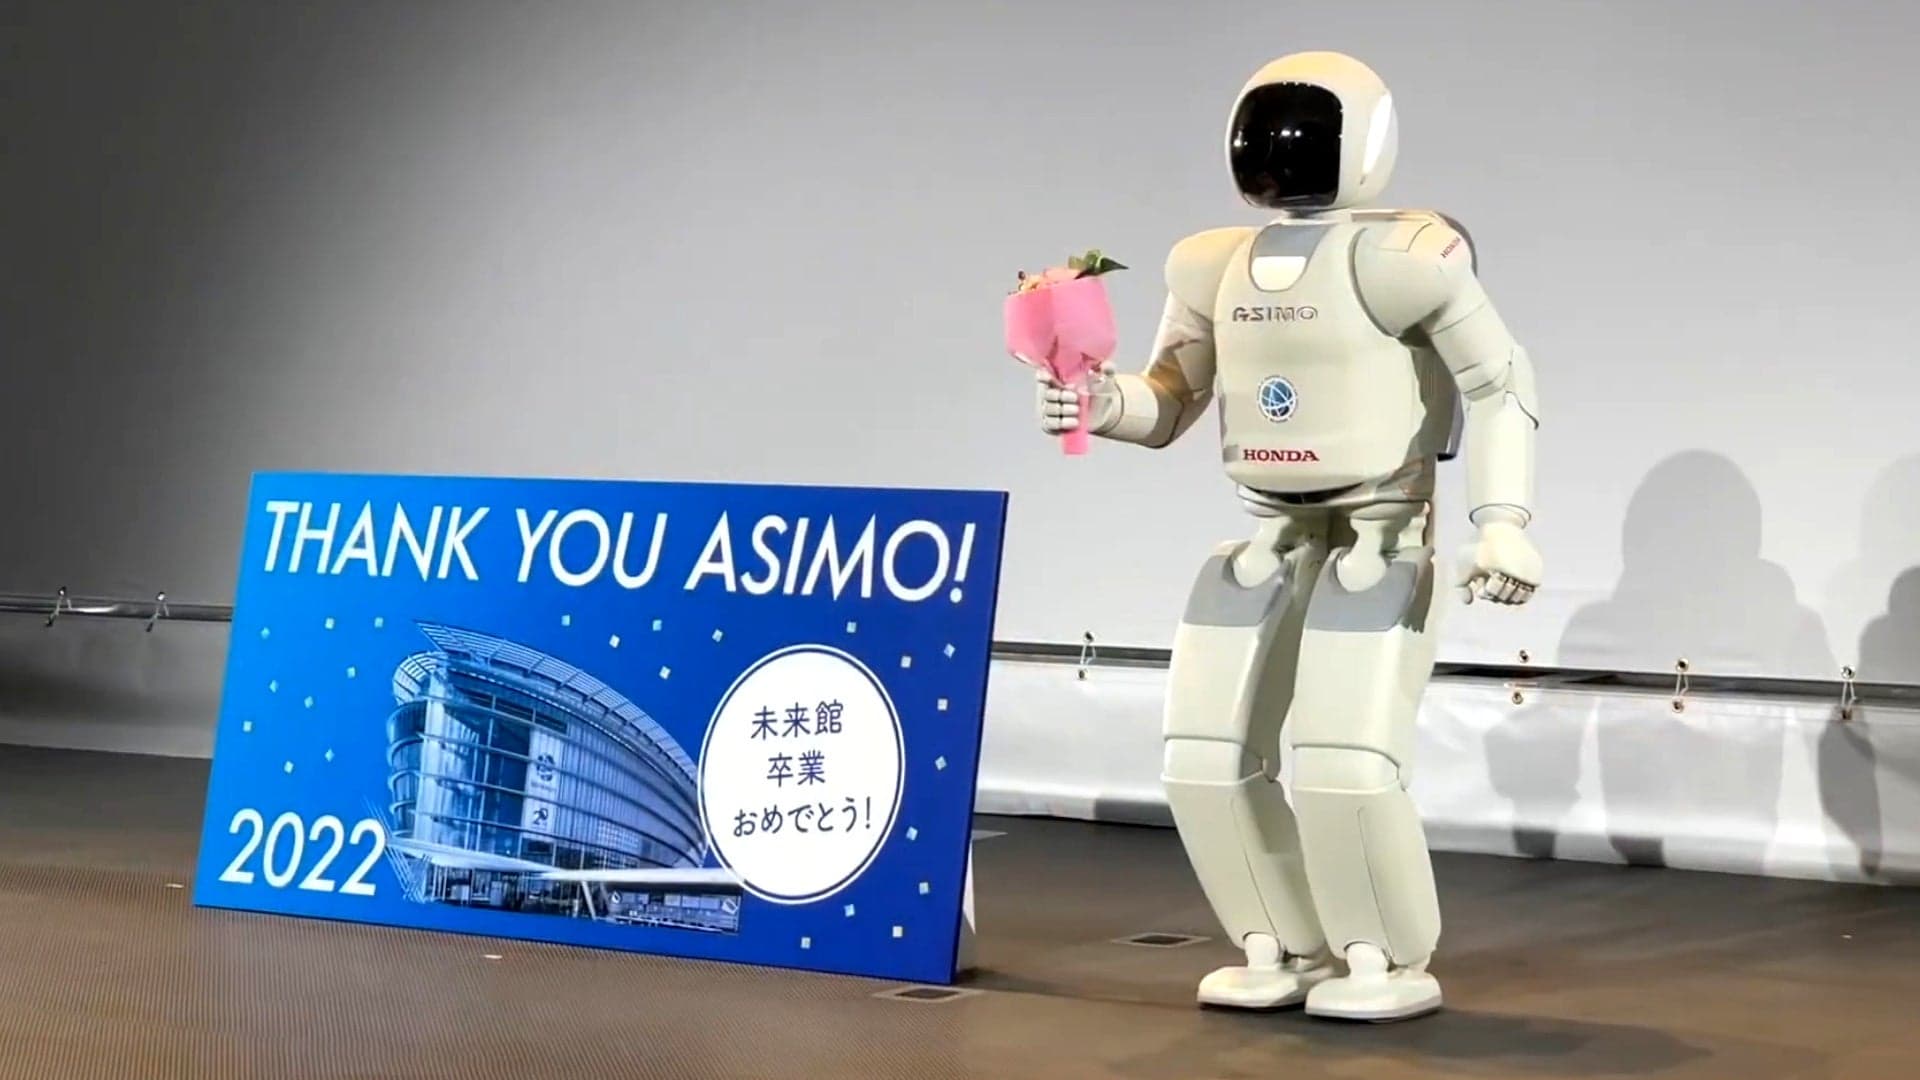 ‘Thank You for These 20 Years’: Honda’s Asimo Robot Says Goodbye Ahead of Decommissioning